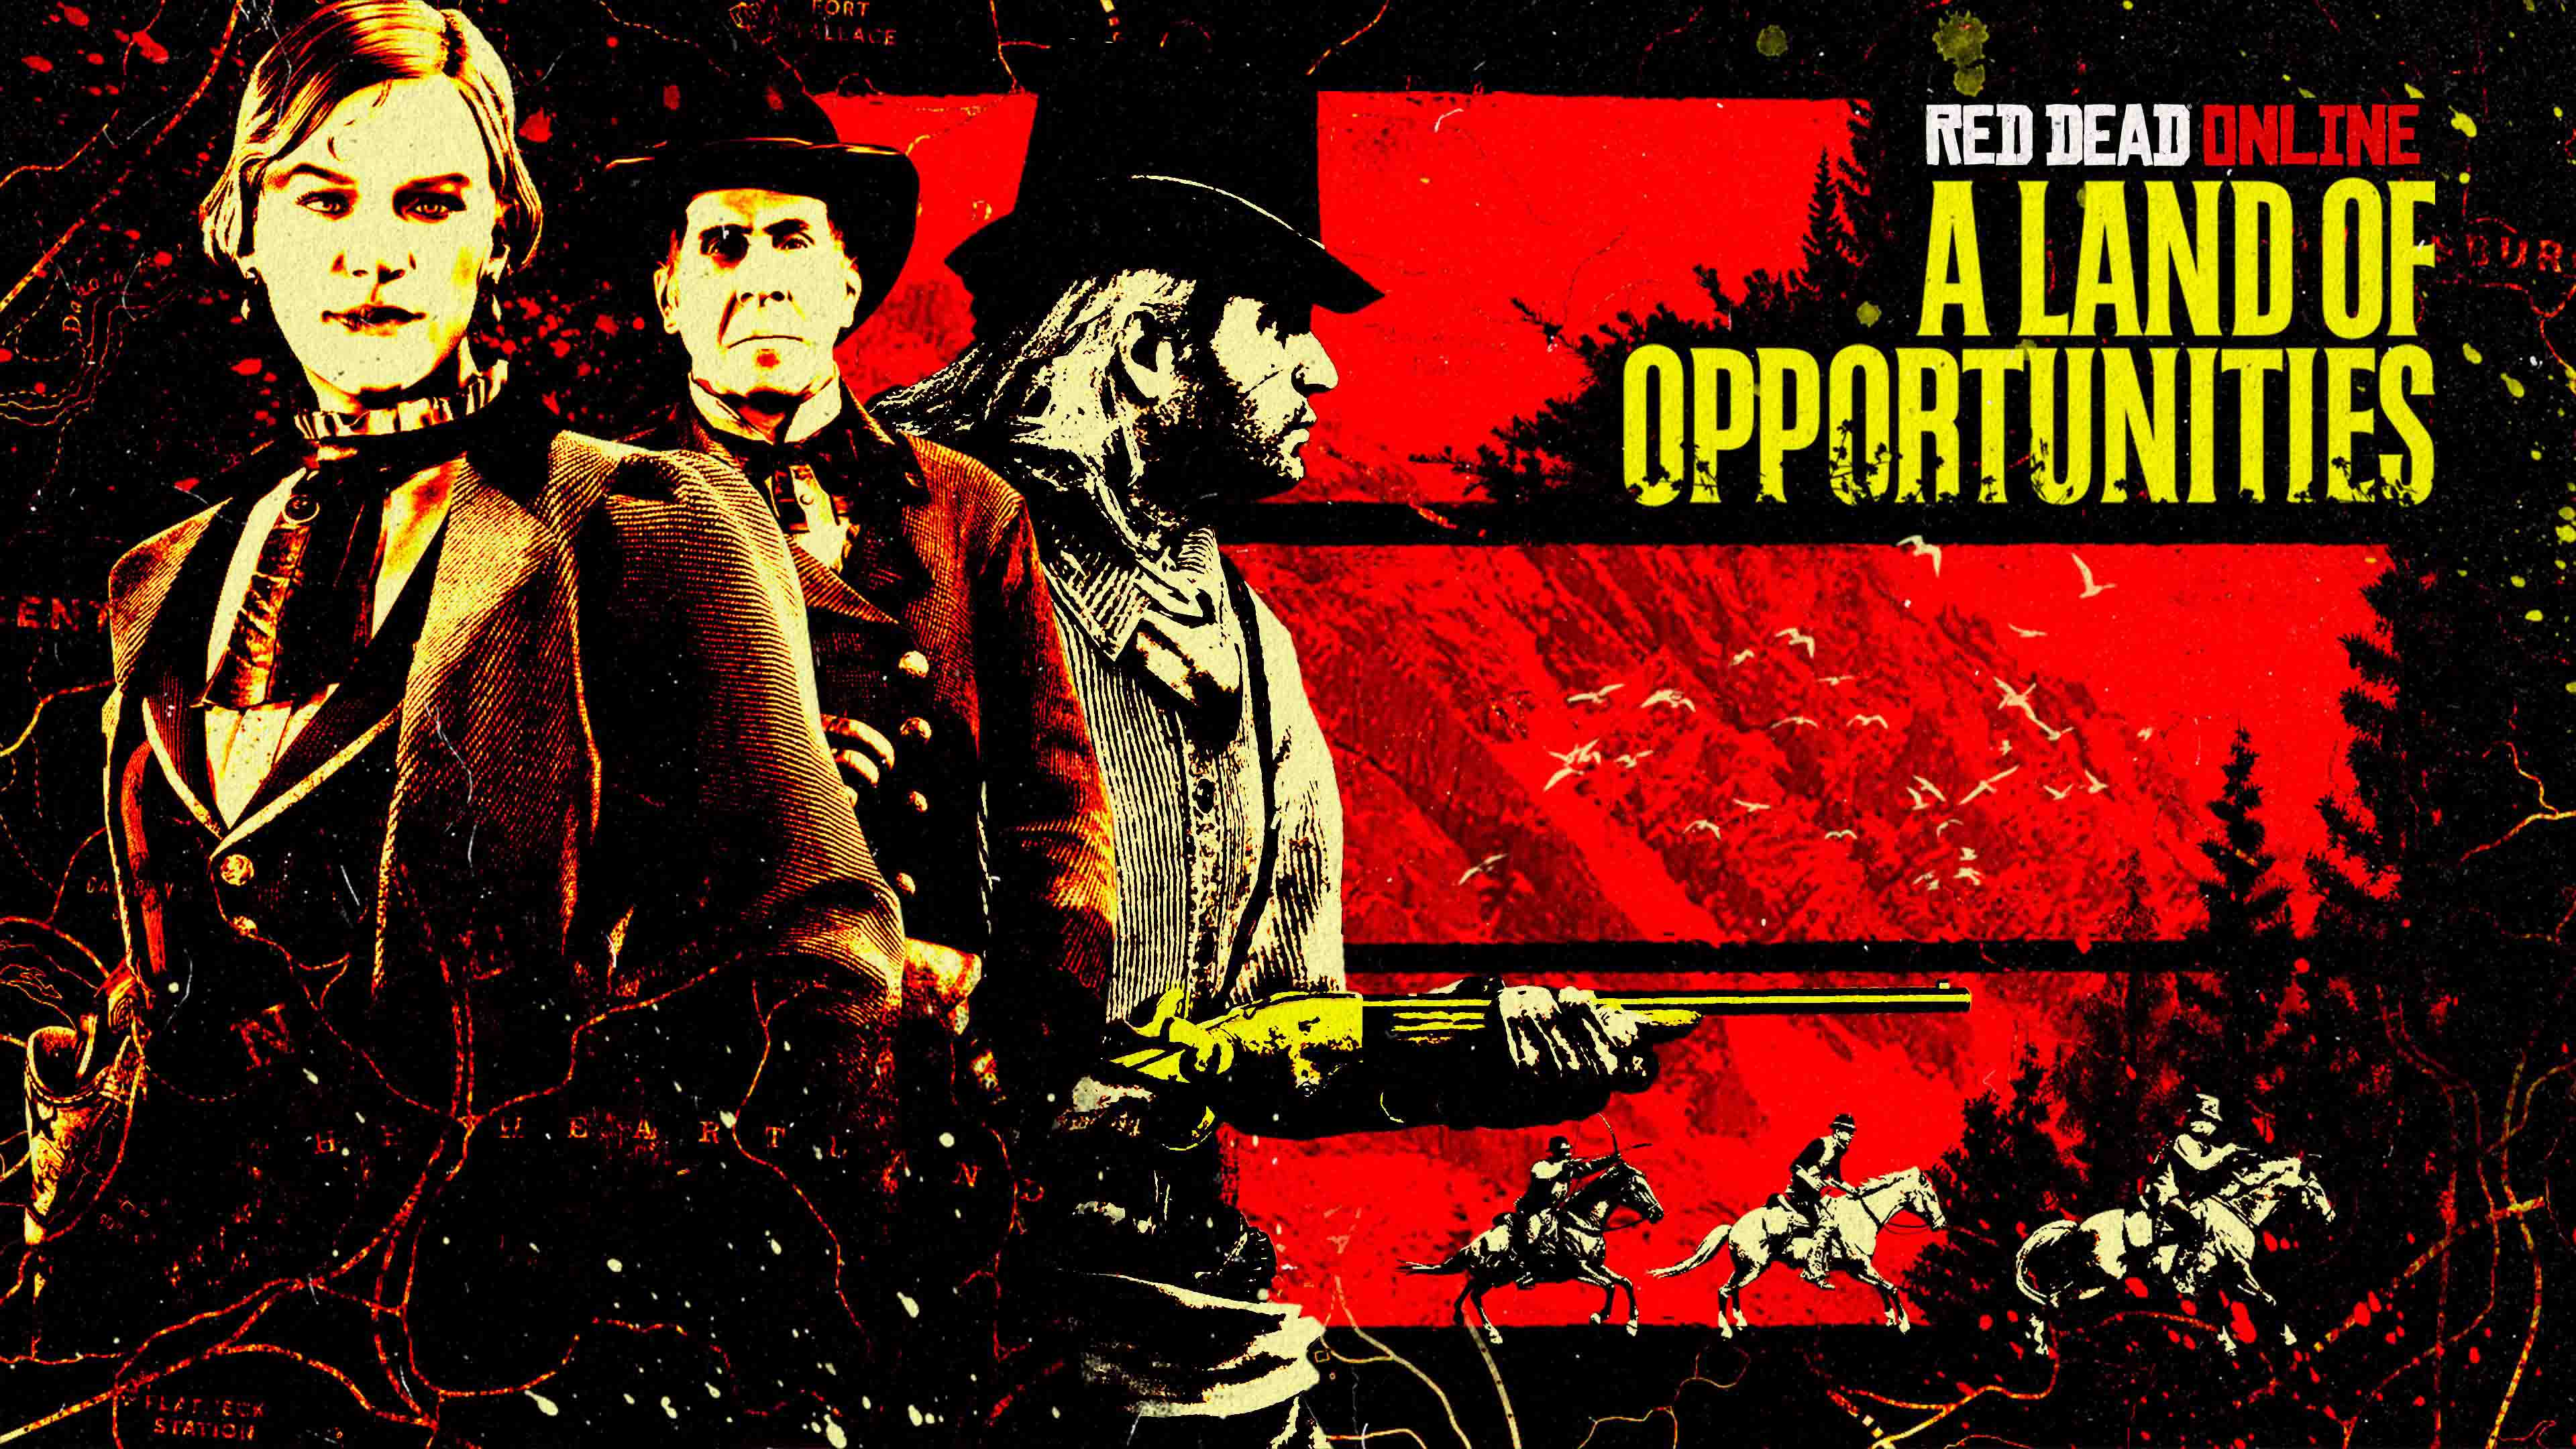 Red Dead Online: Double Rewards on A Land of Opportunities and Featured Series &amp; more